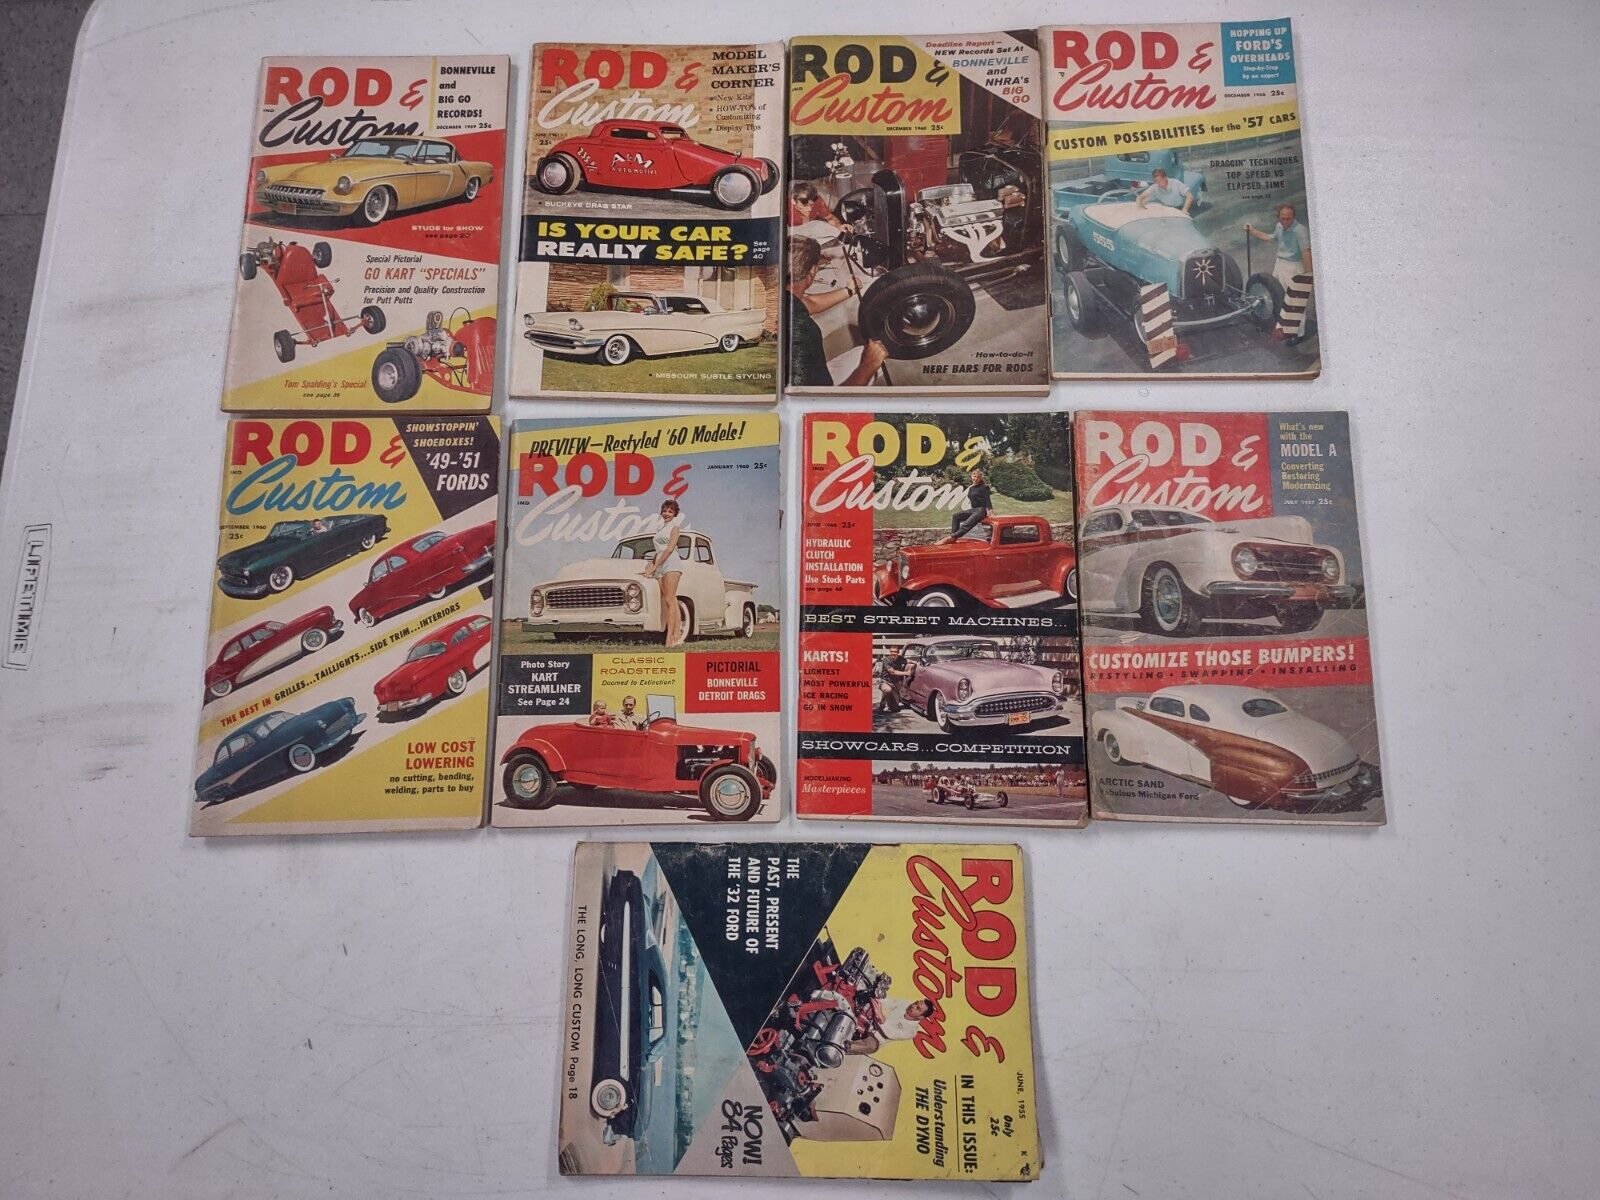 Rod & Custom Magazine Lot, Issues From 1955, 1956, 1957, 1959, 1960, & 1961